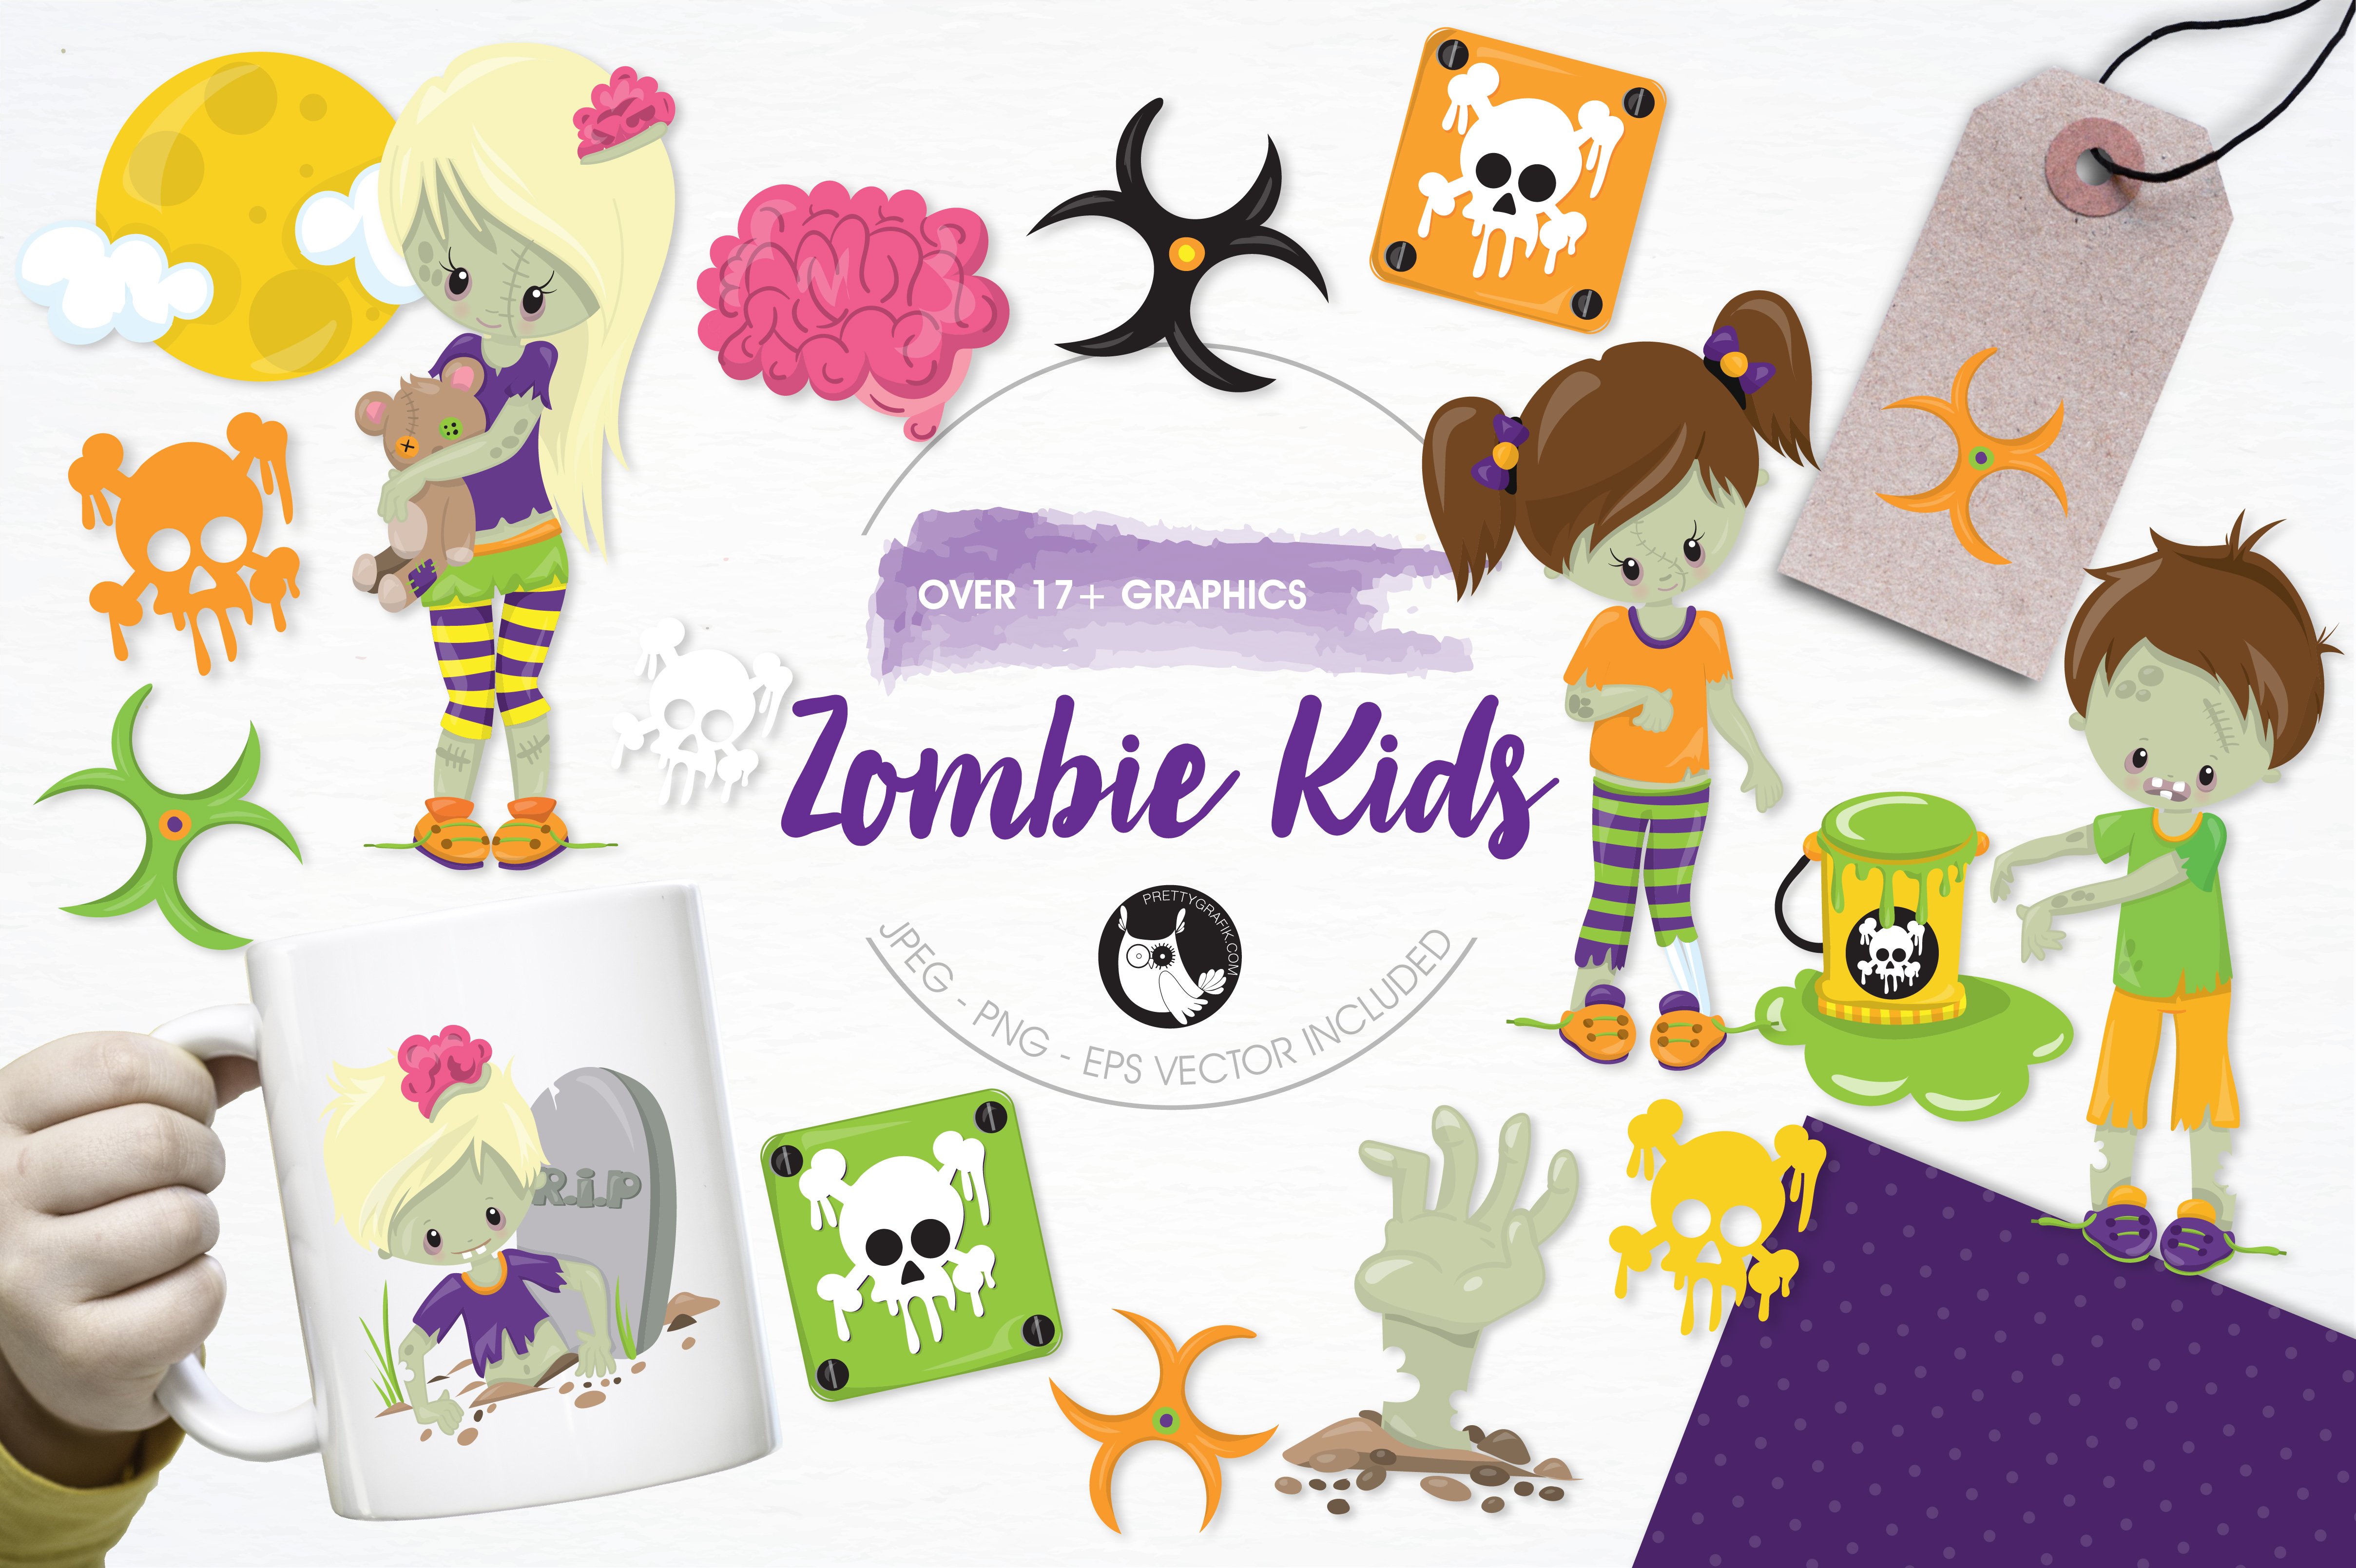 Halloween Zombies Illustration Pack - Vector Image